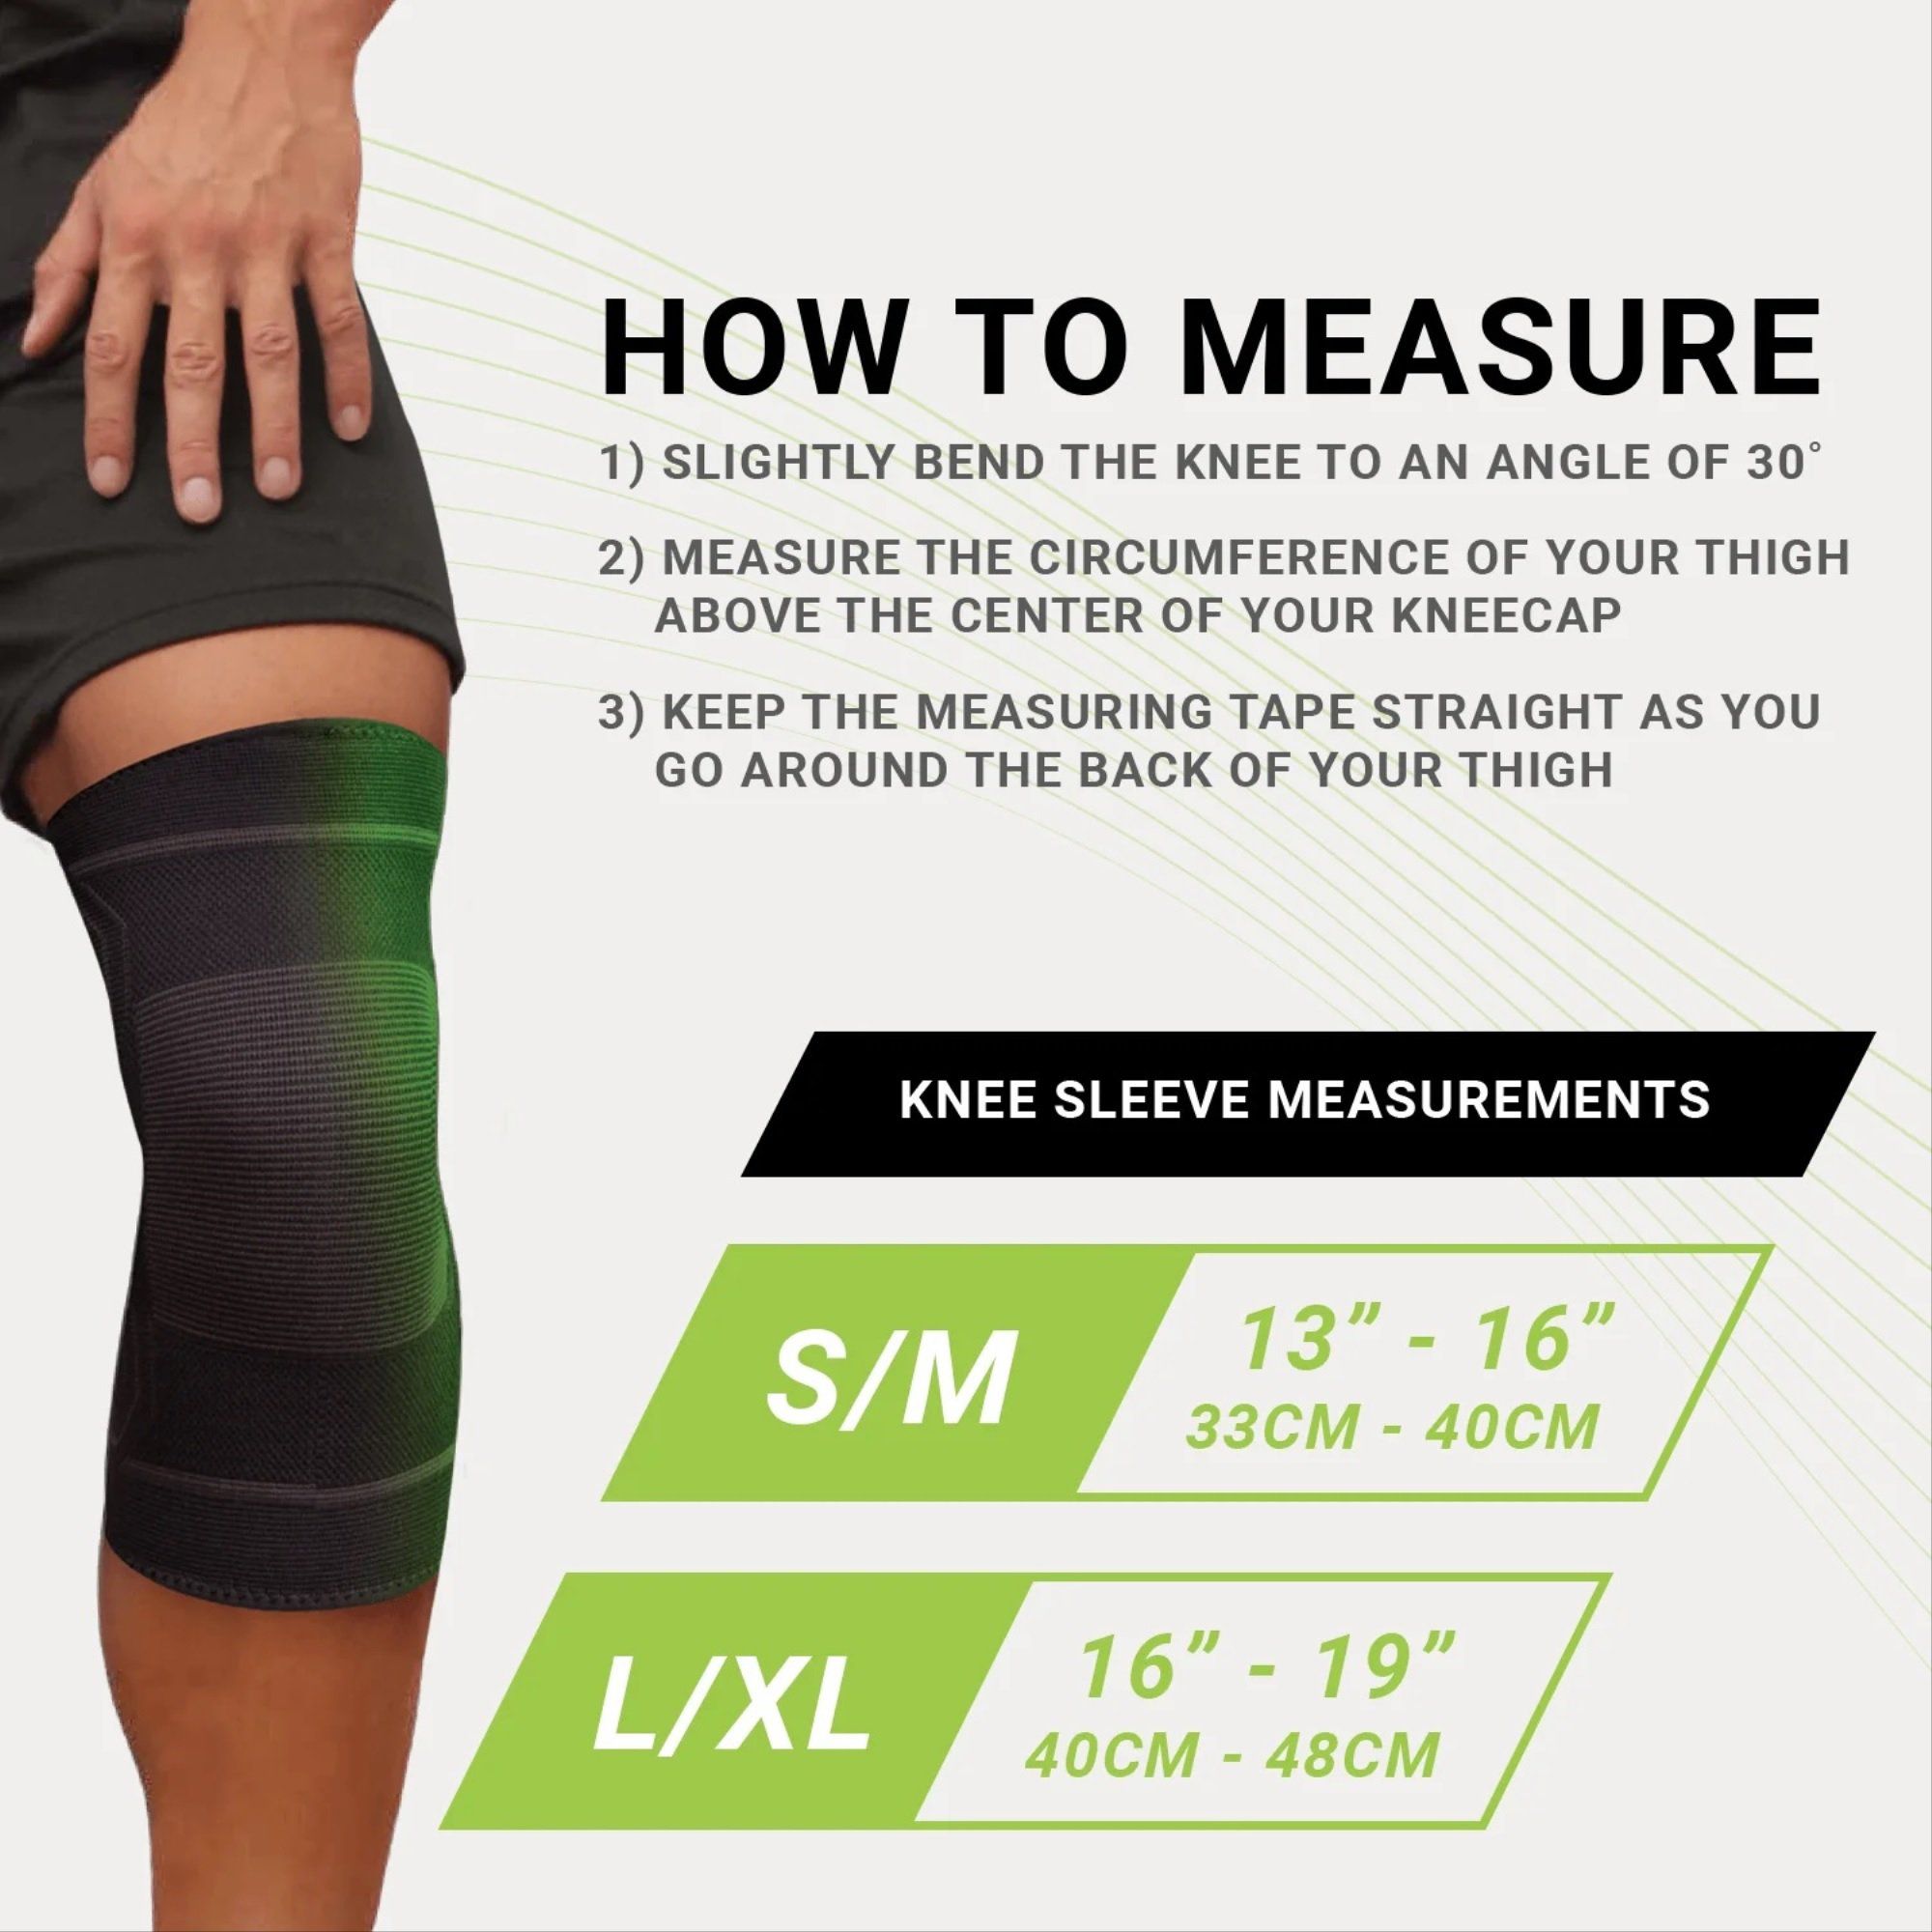 Green Drop Infused Recovery Compression Knee Sleeve, Black - Large/X-Large